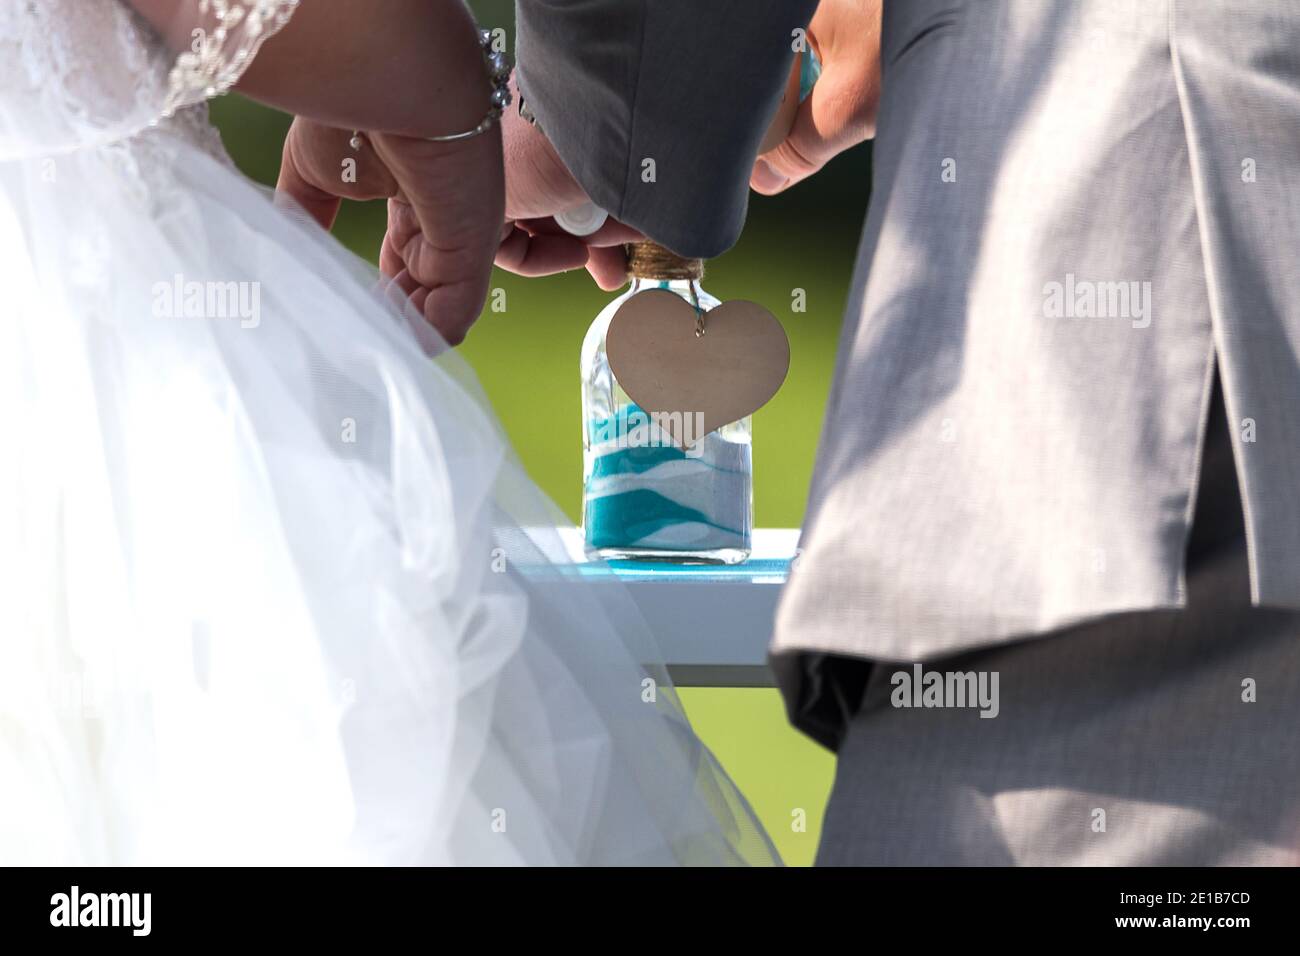 A Couple adding sand together to a jar in a sand ritual during their wedding ceremony.  Room for Copy Stock Photo